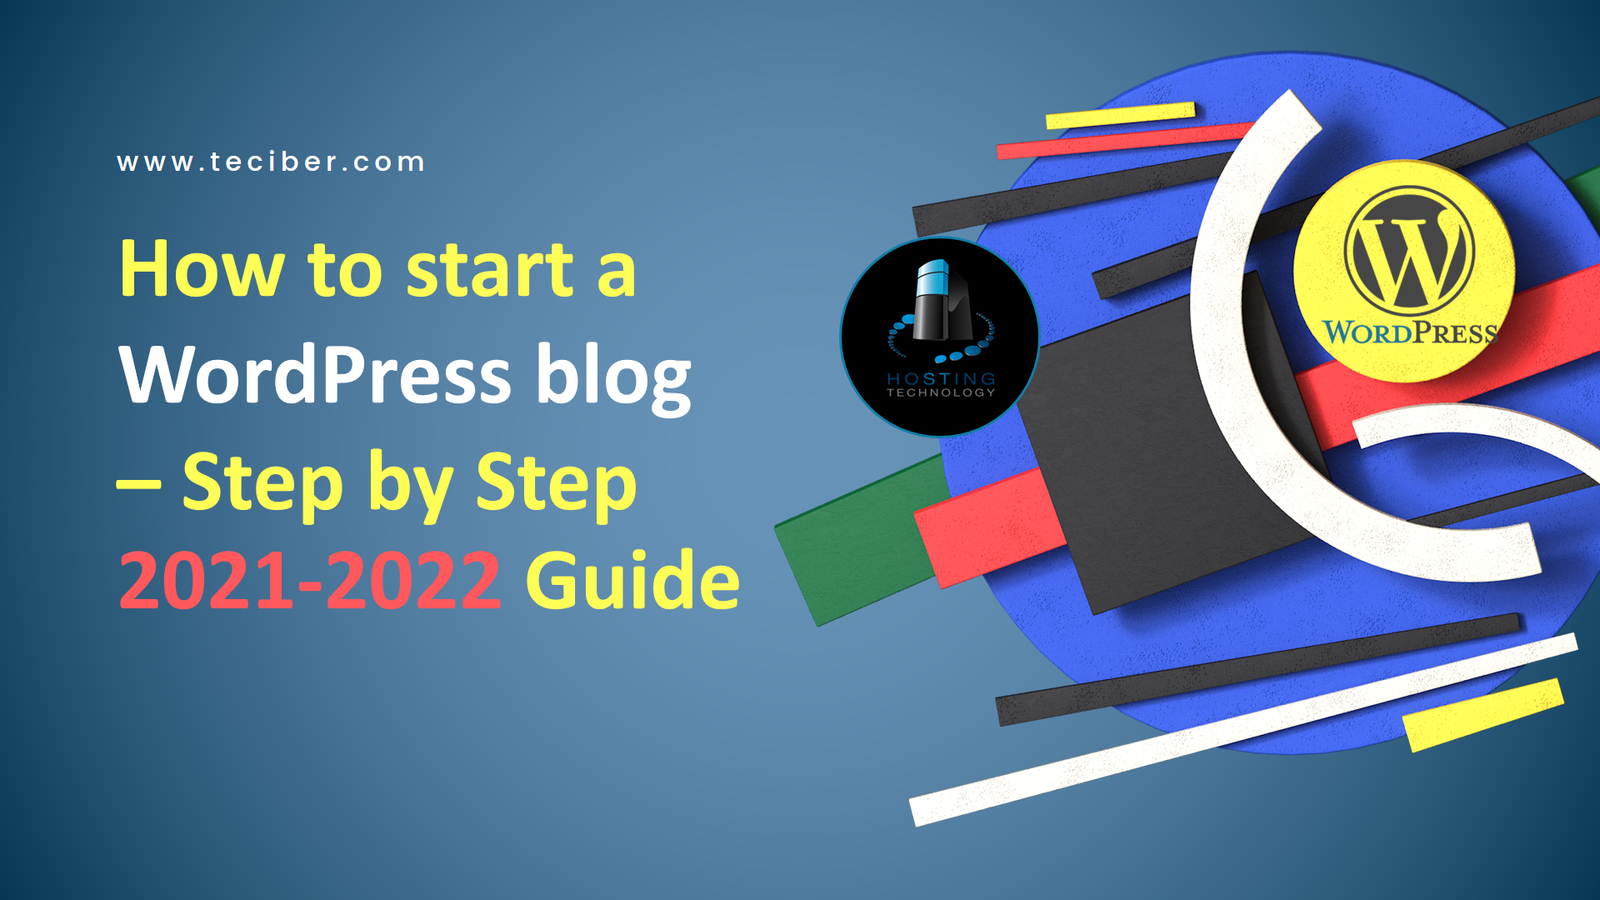 How to start a WordPress blog - Step by Step 2021 Guide